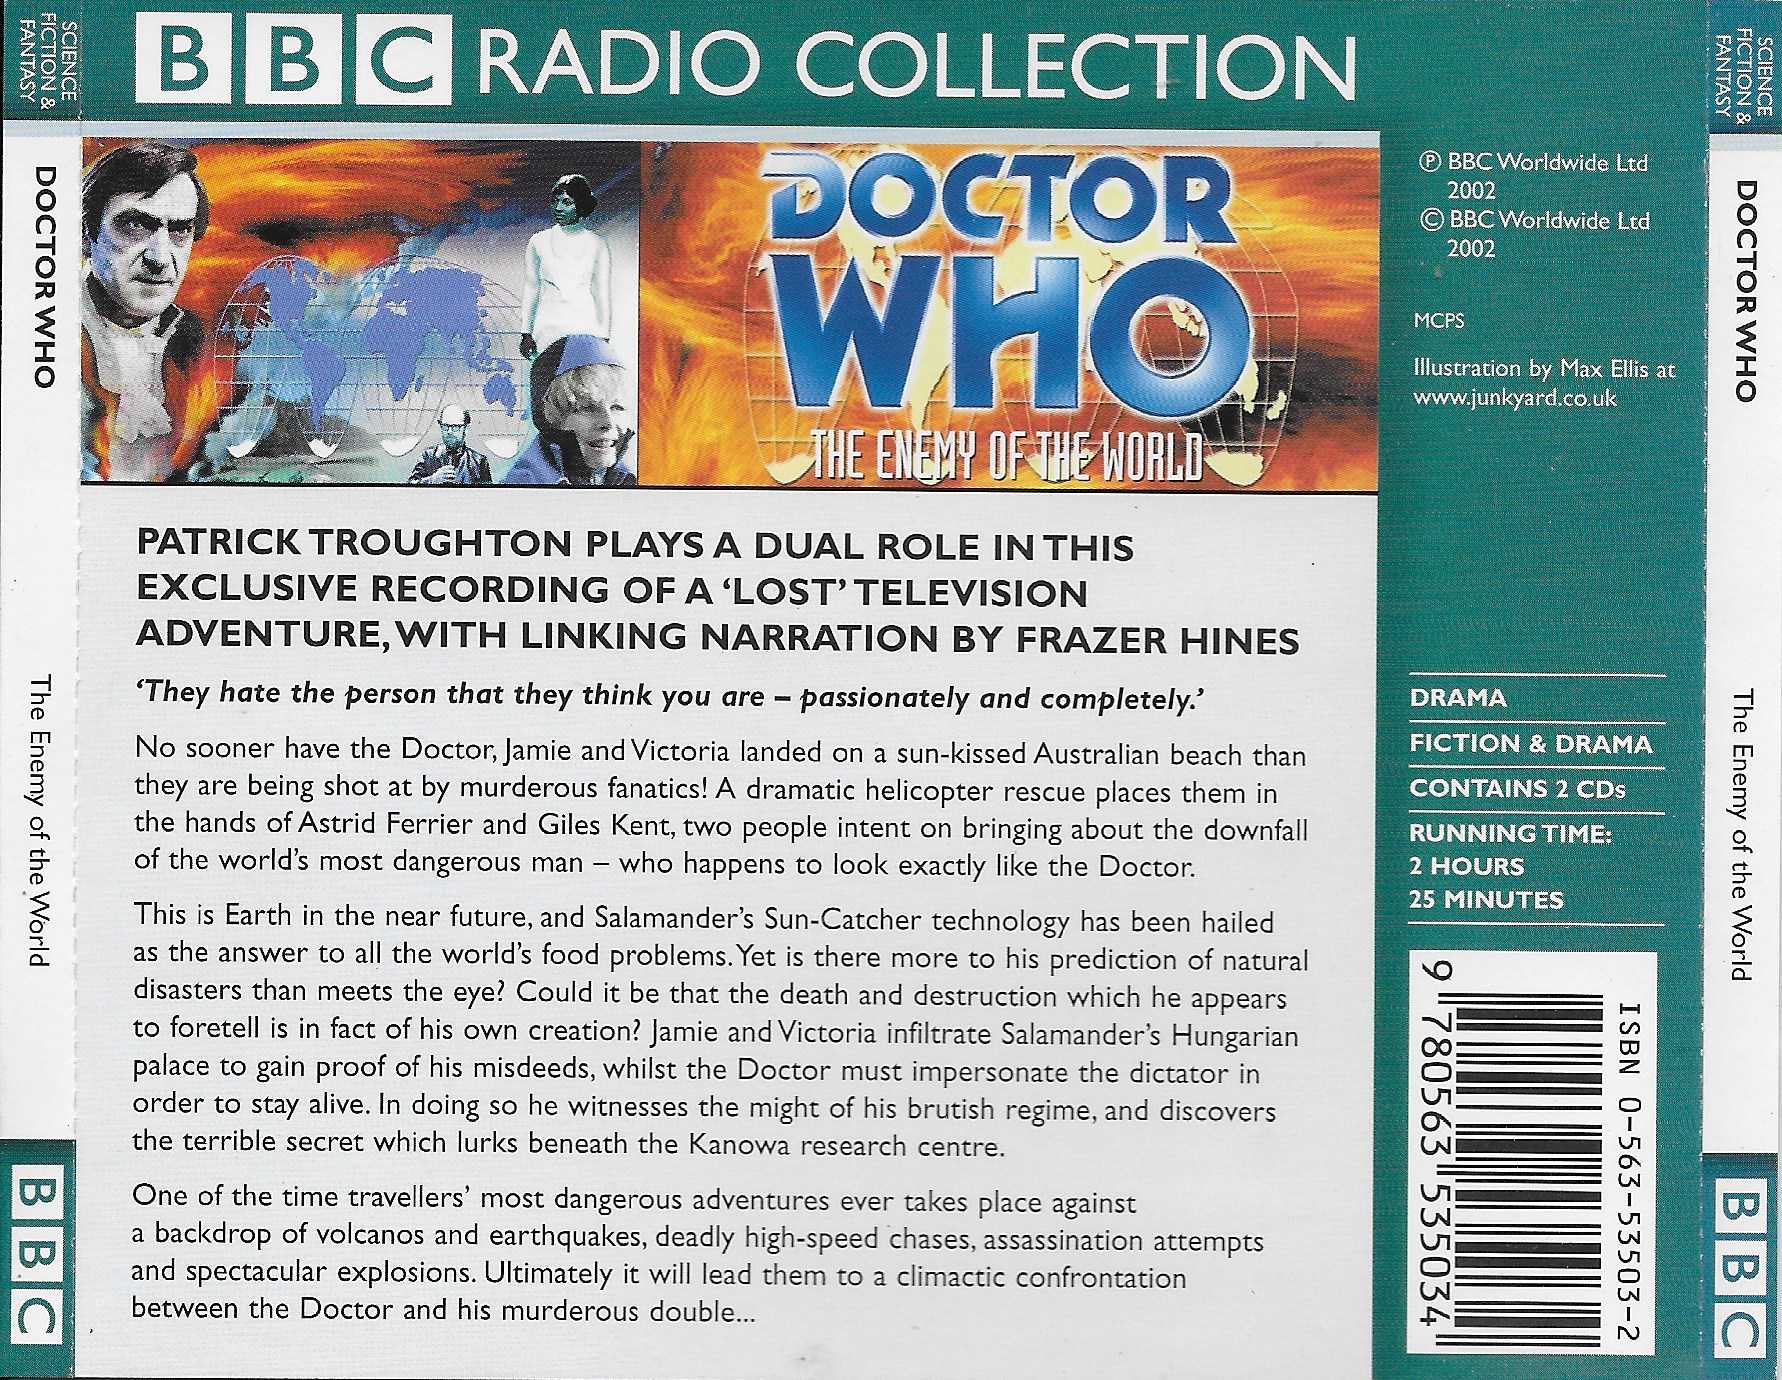 Picture of ISBN 0-563-53503-2 Doctor Who - The enemy of the world by artist David Whitaker from the BBC records and Tapes library